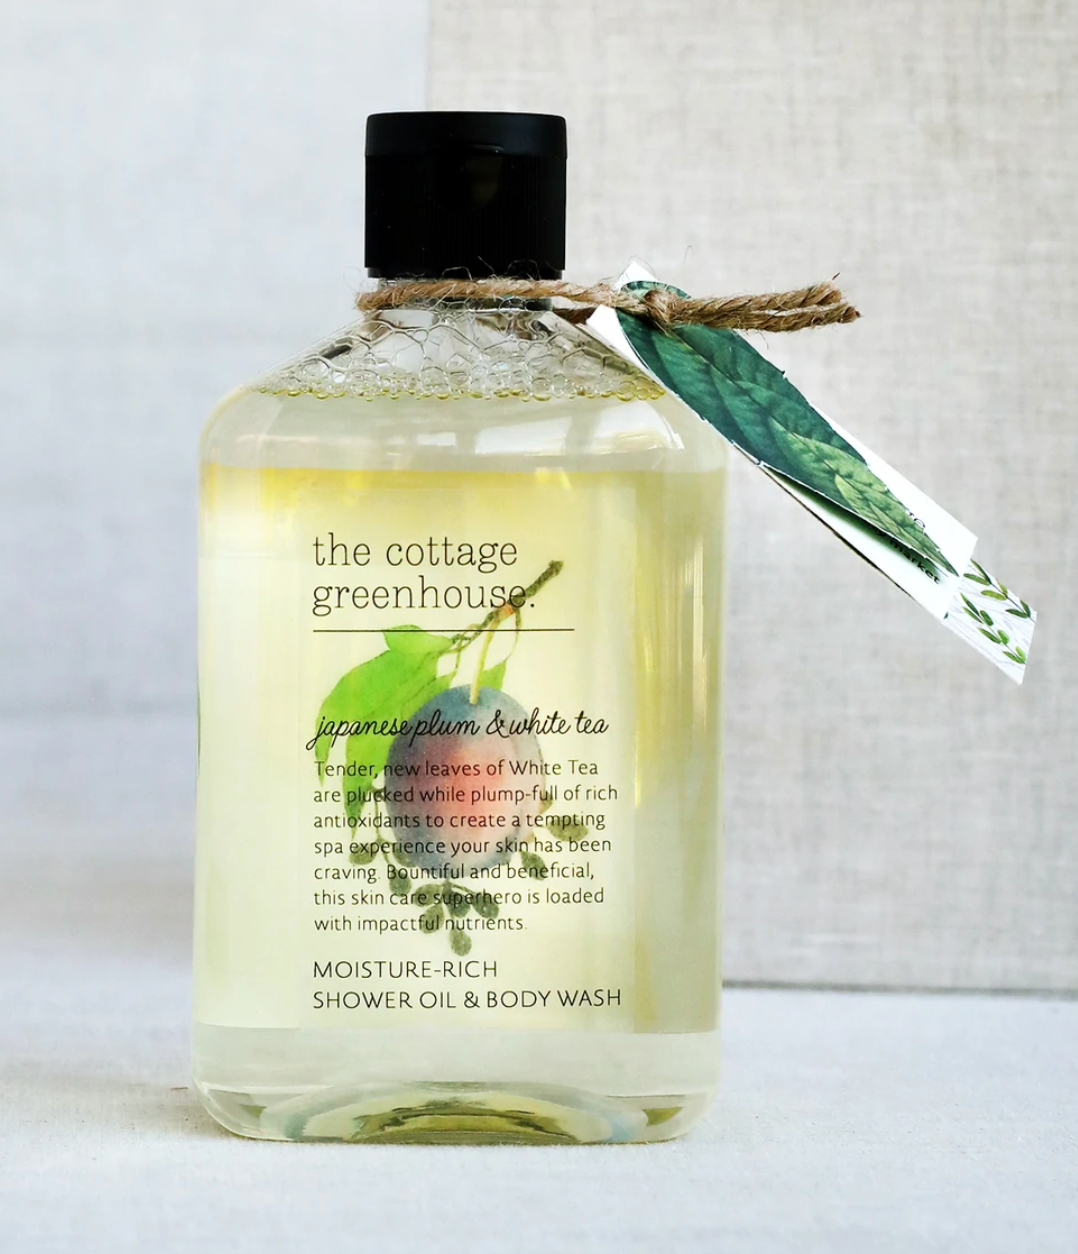 The Cottage Greenhouse Body Wash